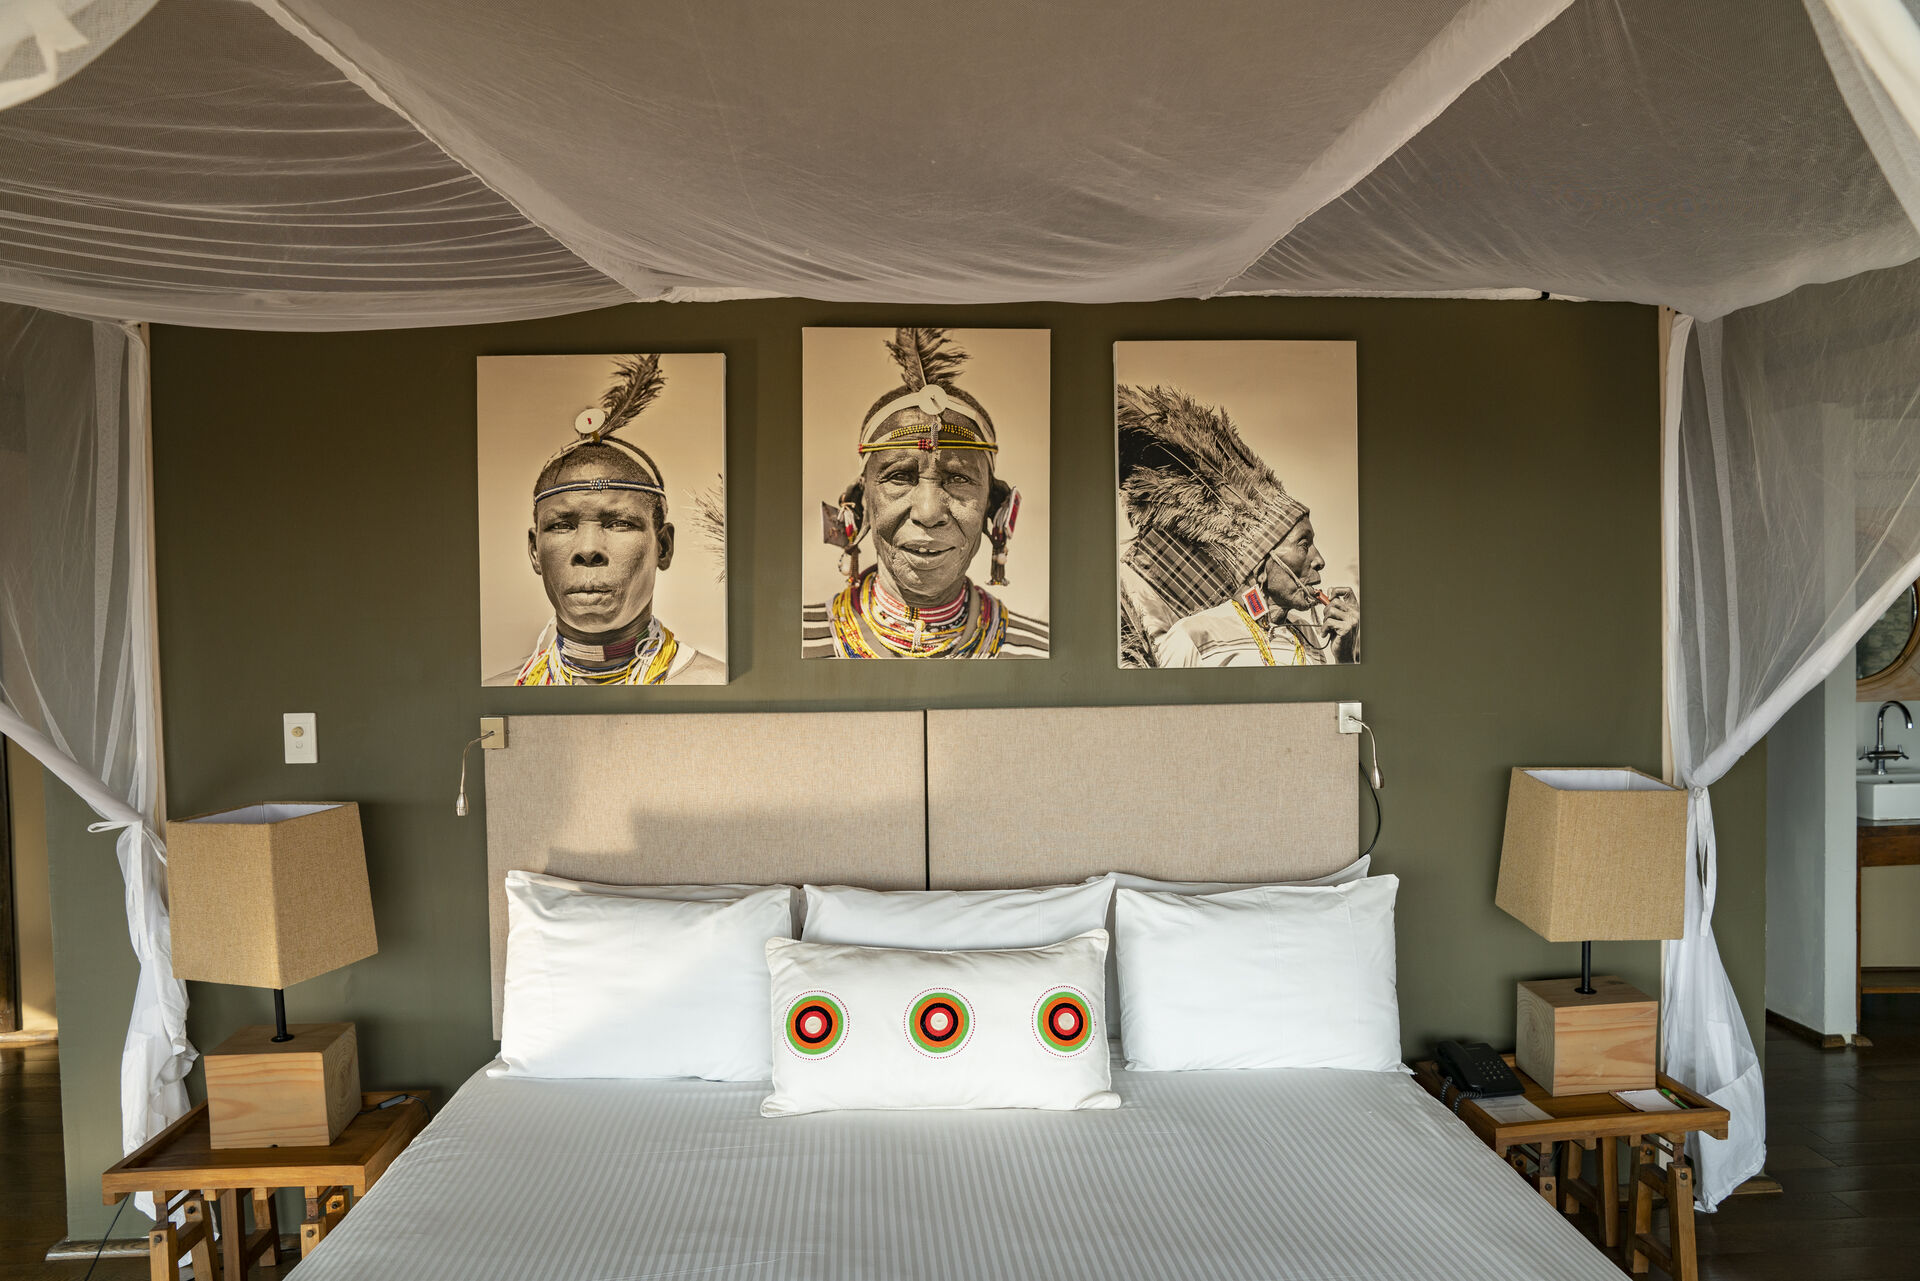 Northern Serengeti – Recommended Jul-Sep